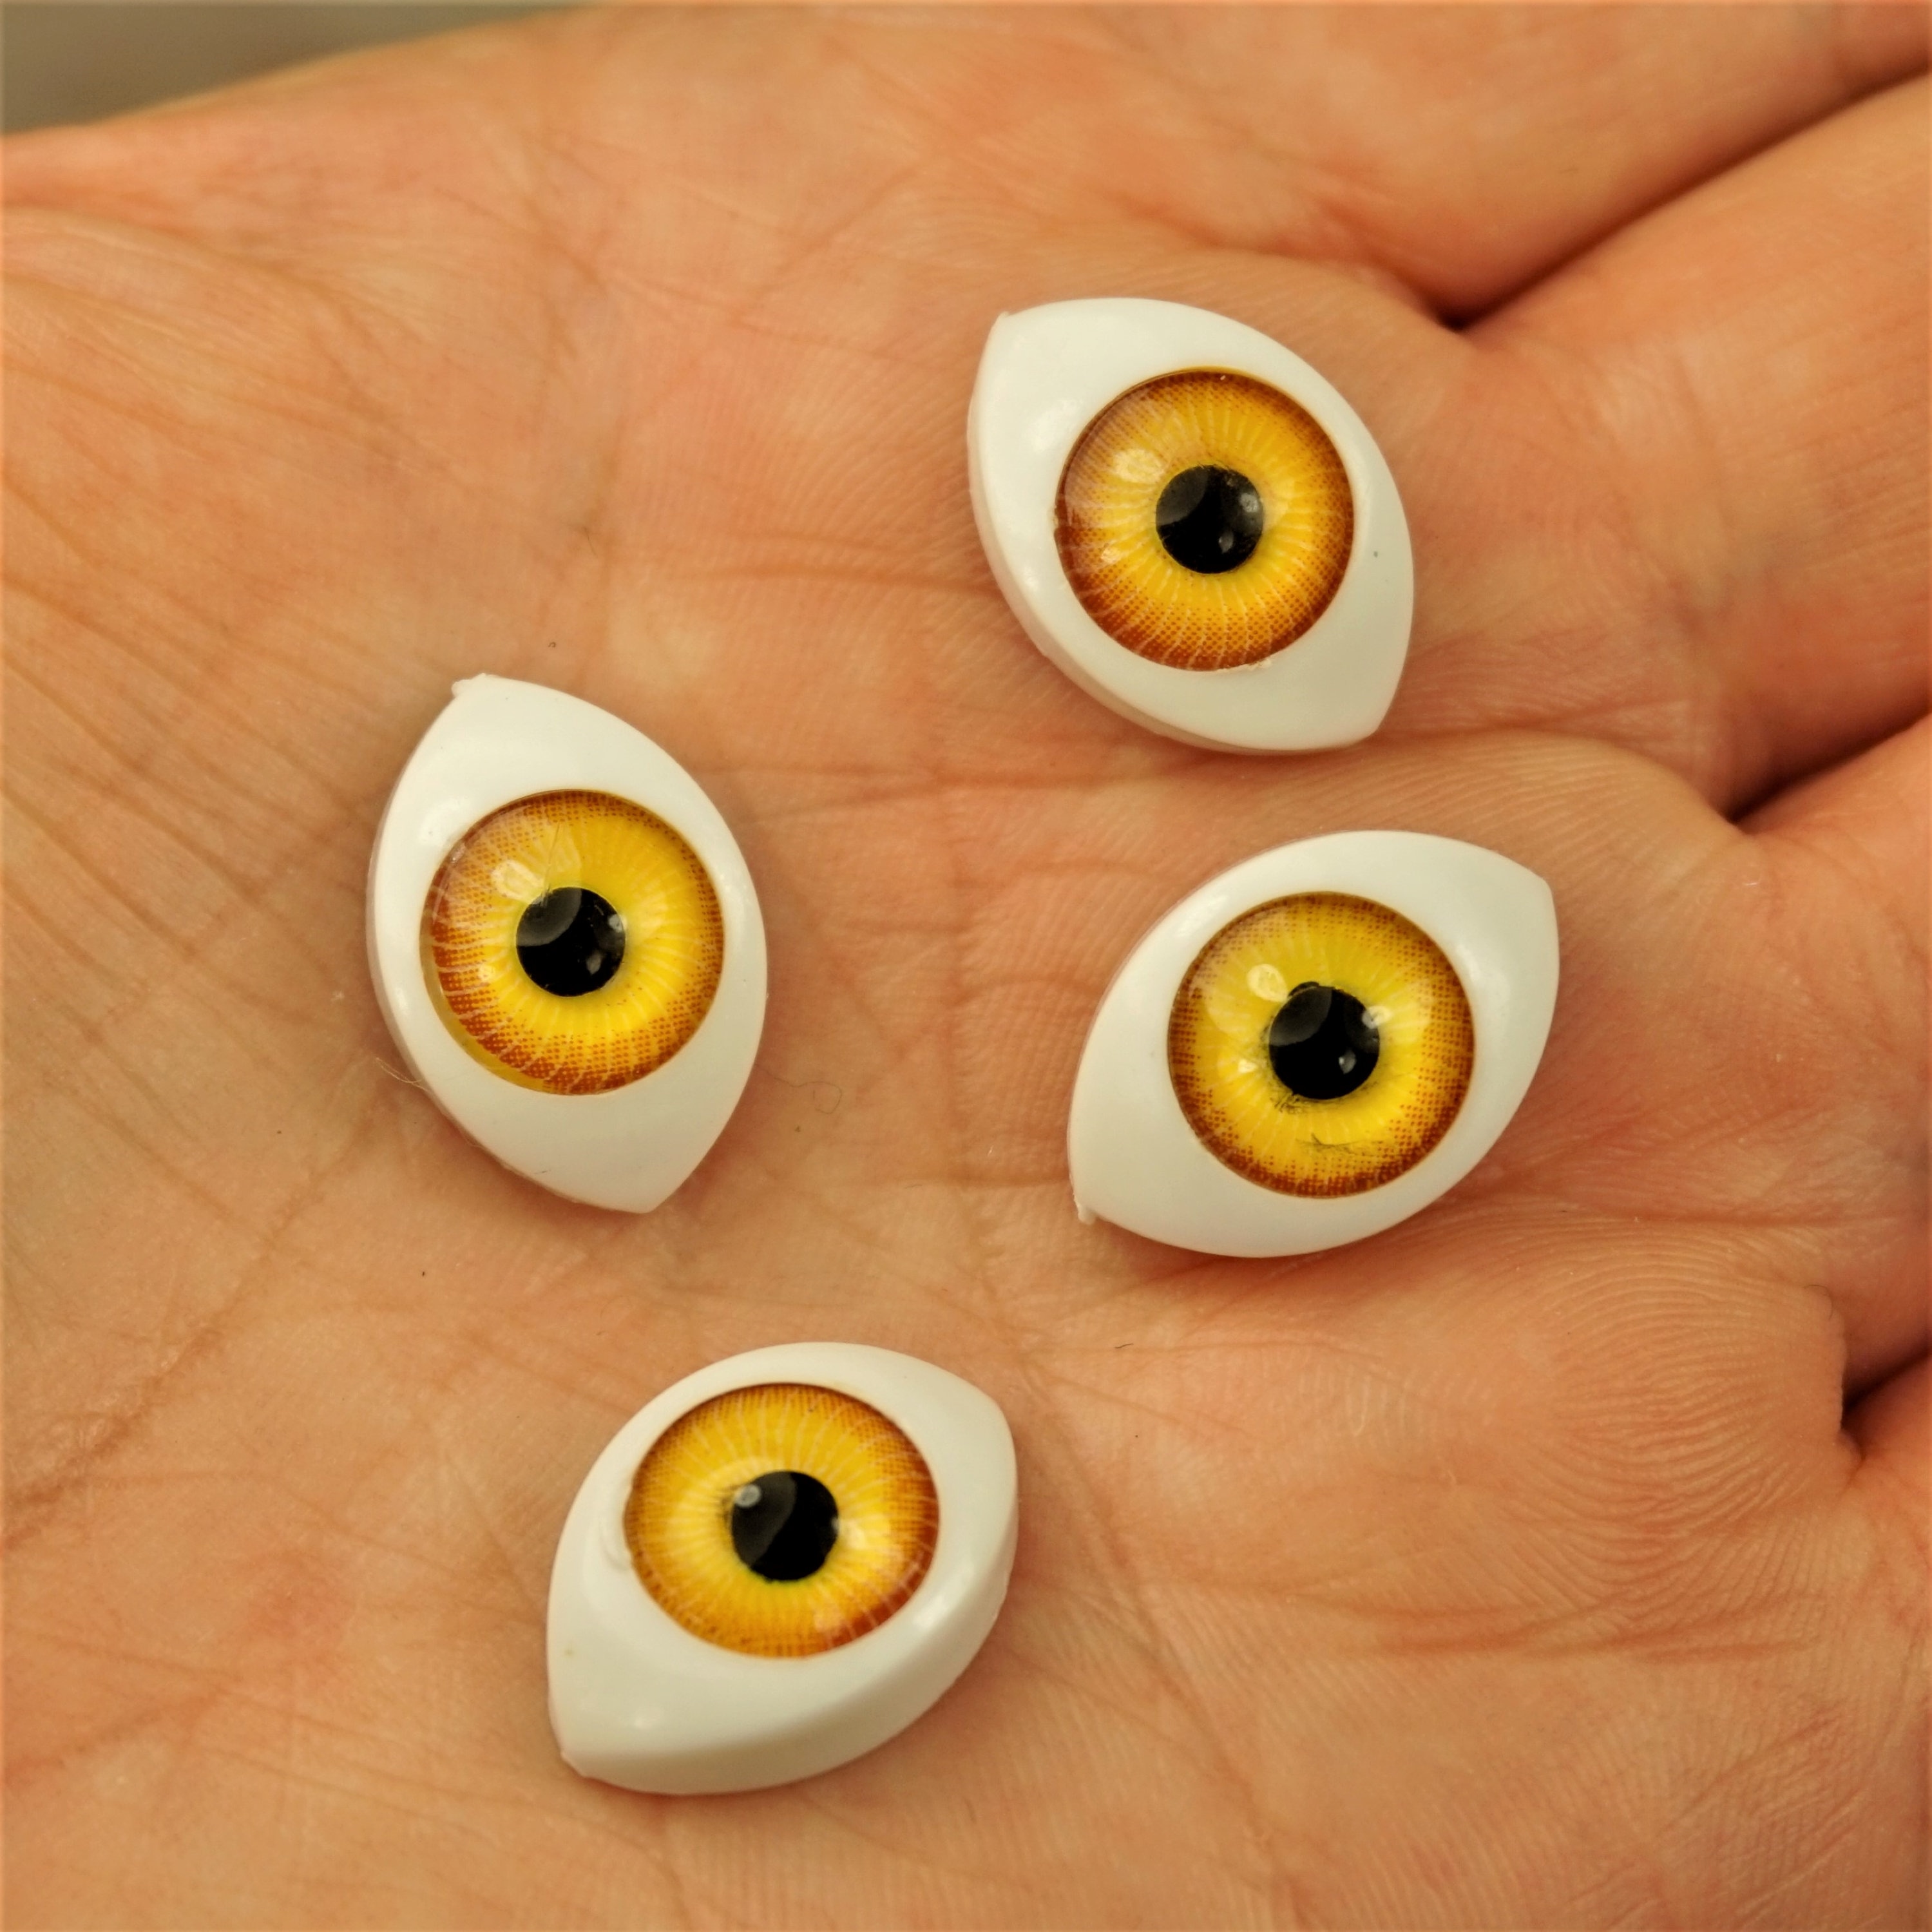 EXCEART 200 Pcs Eyeballs Toy Doll Heads for Doll Making Simulated Eyes  Pendant Halloween Eyeballs Fake Eyes Eyeballs for Crafts Toys DIY  Accessories